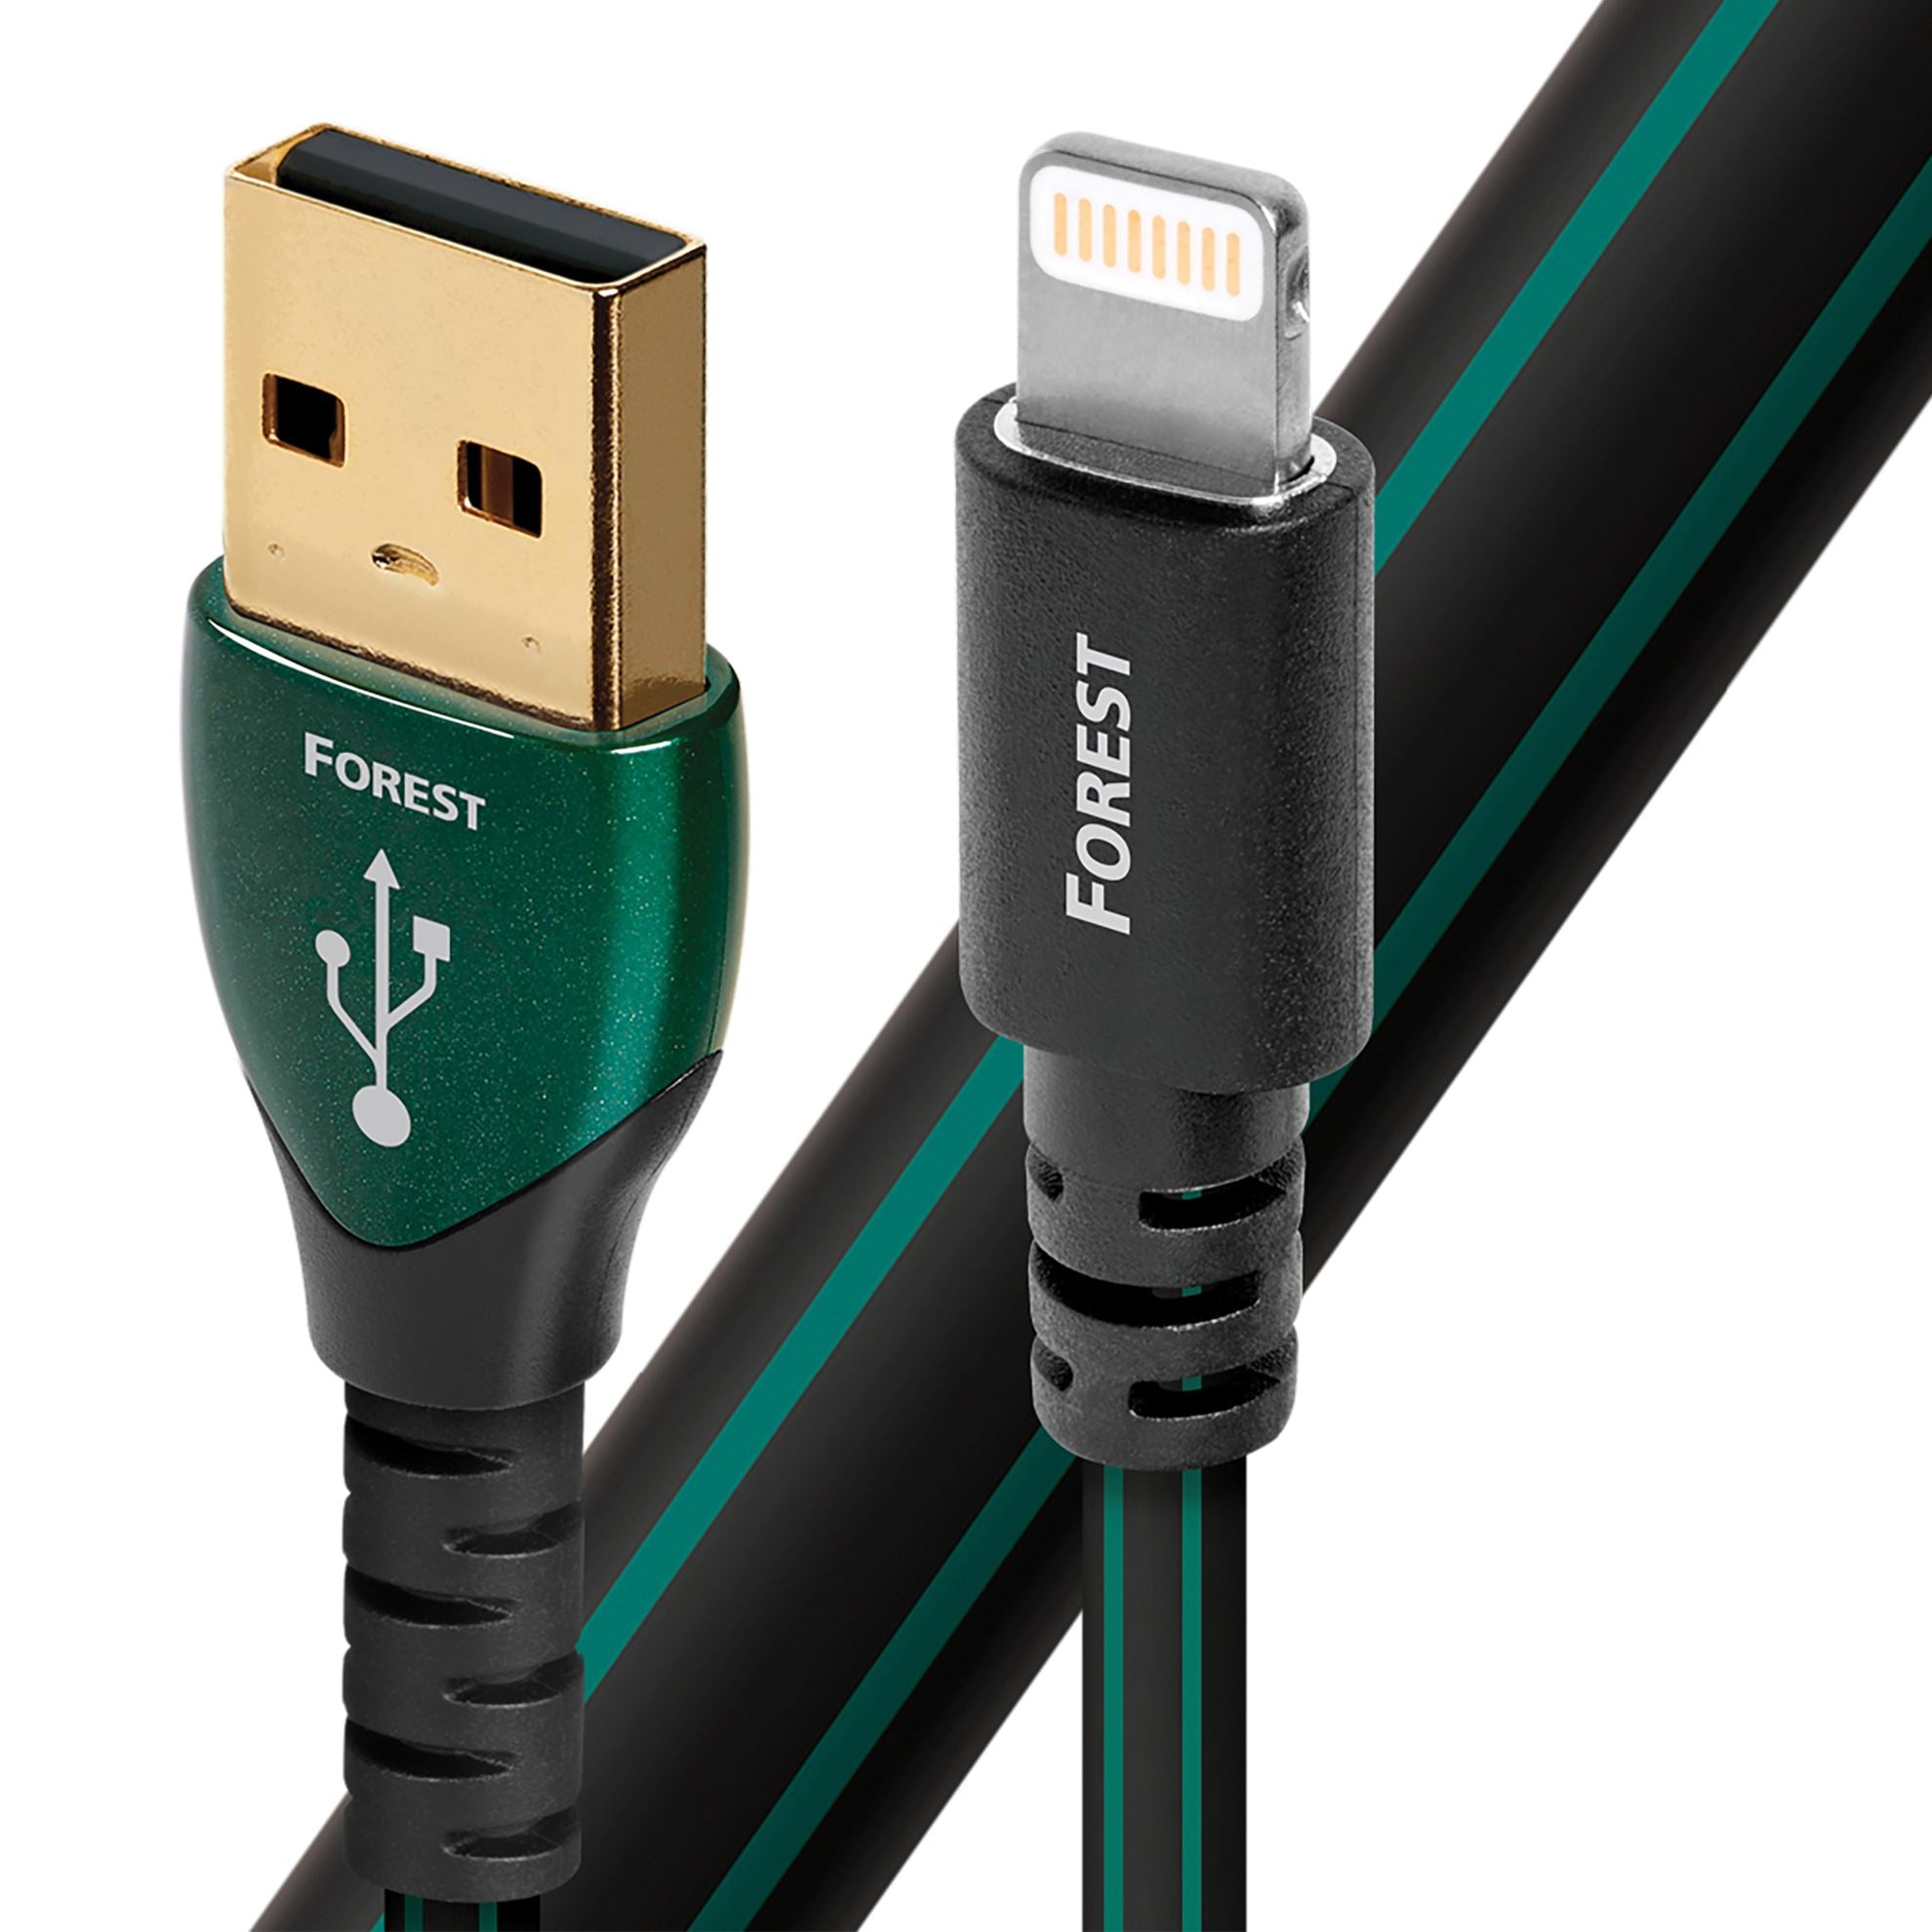 AUDIOQUEST_Forest_1.5M_lightning_to_USB2A._O.5%_silver._Hard-cell_foam._Metal-layer_noise_dissipation_Jacket_-_black_PVC_with_green_stripes._1.5M_FOREST_LIGHTNING-USB 1486